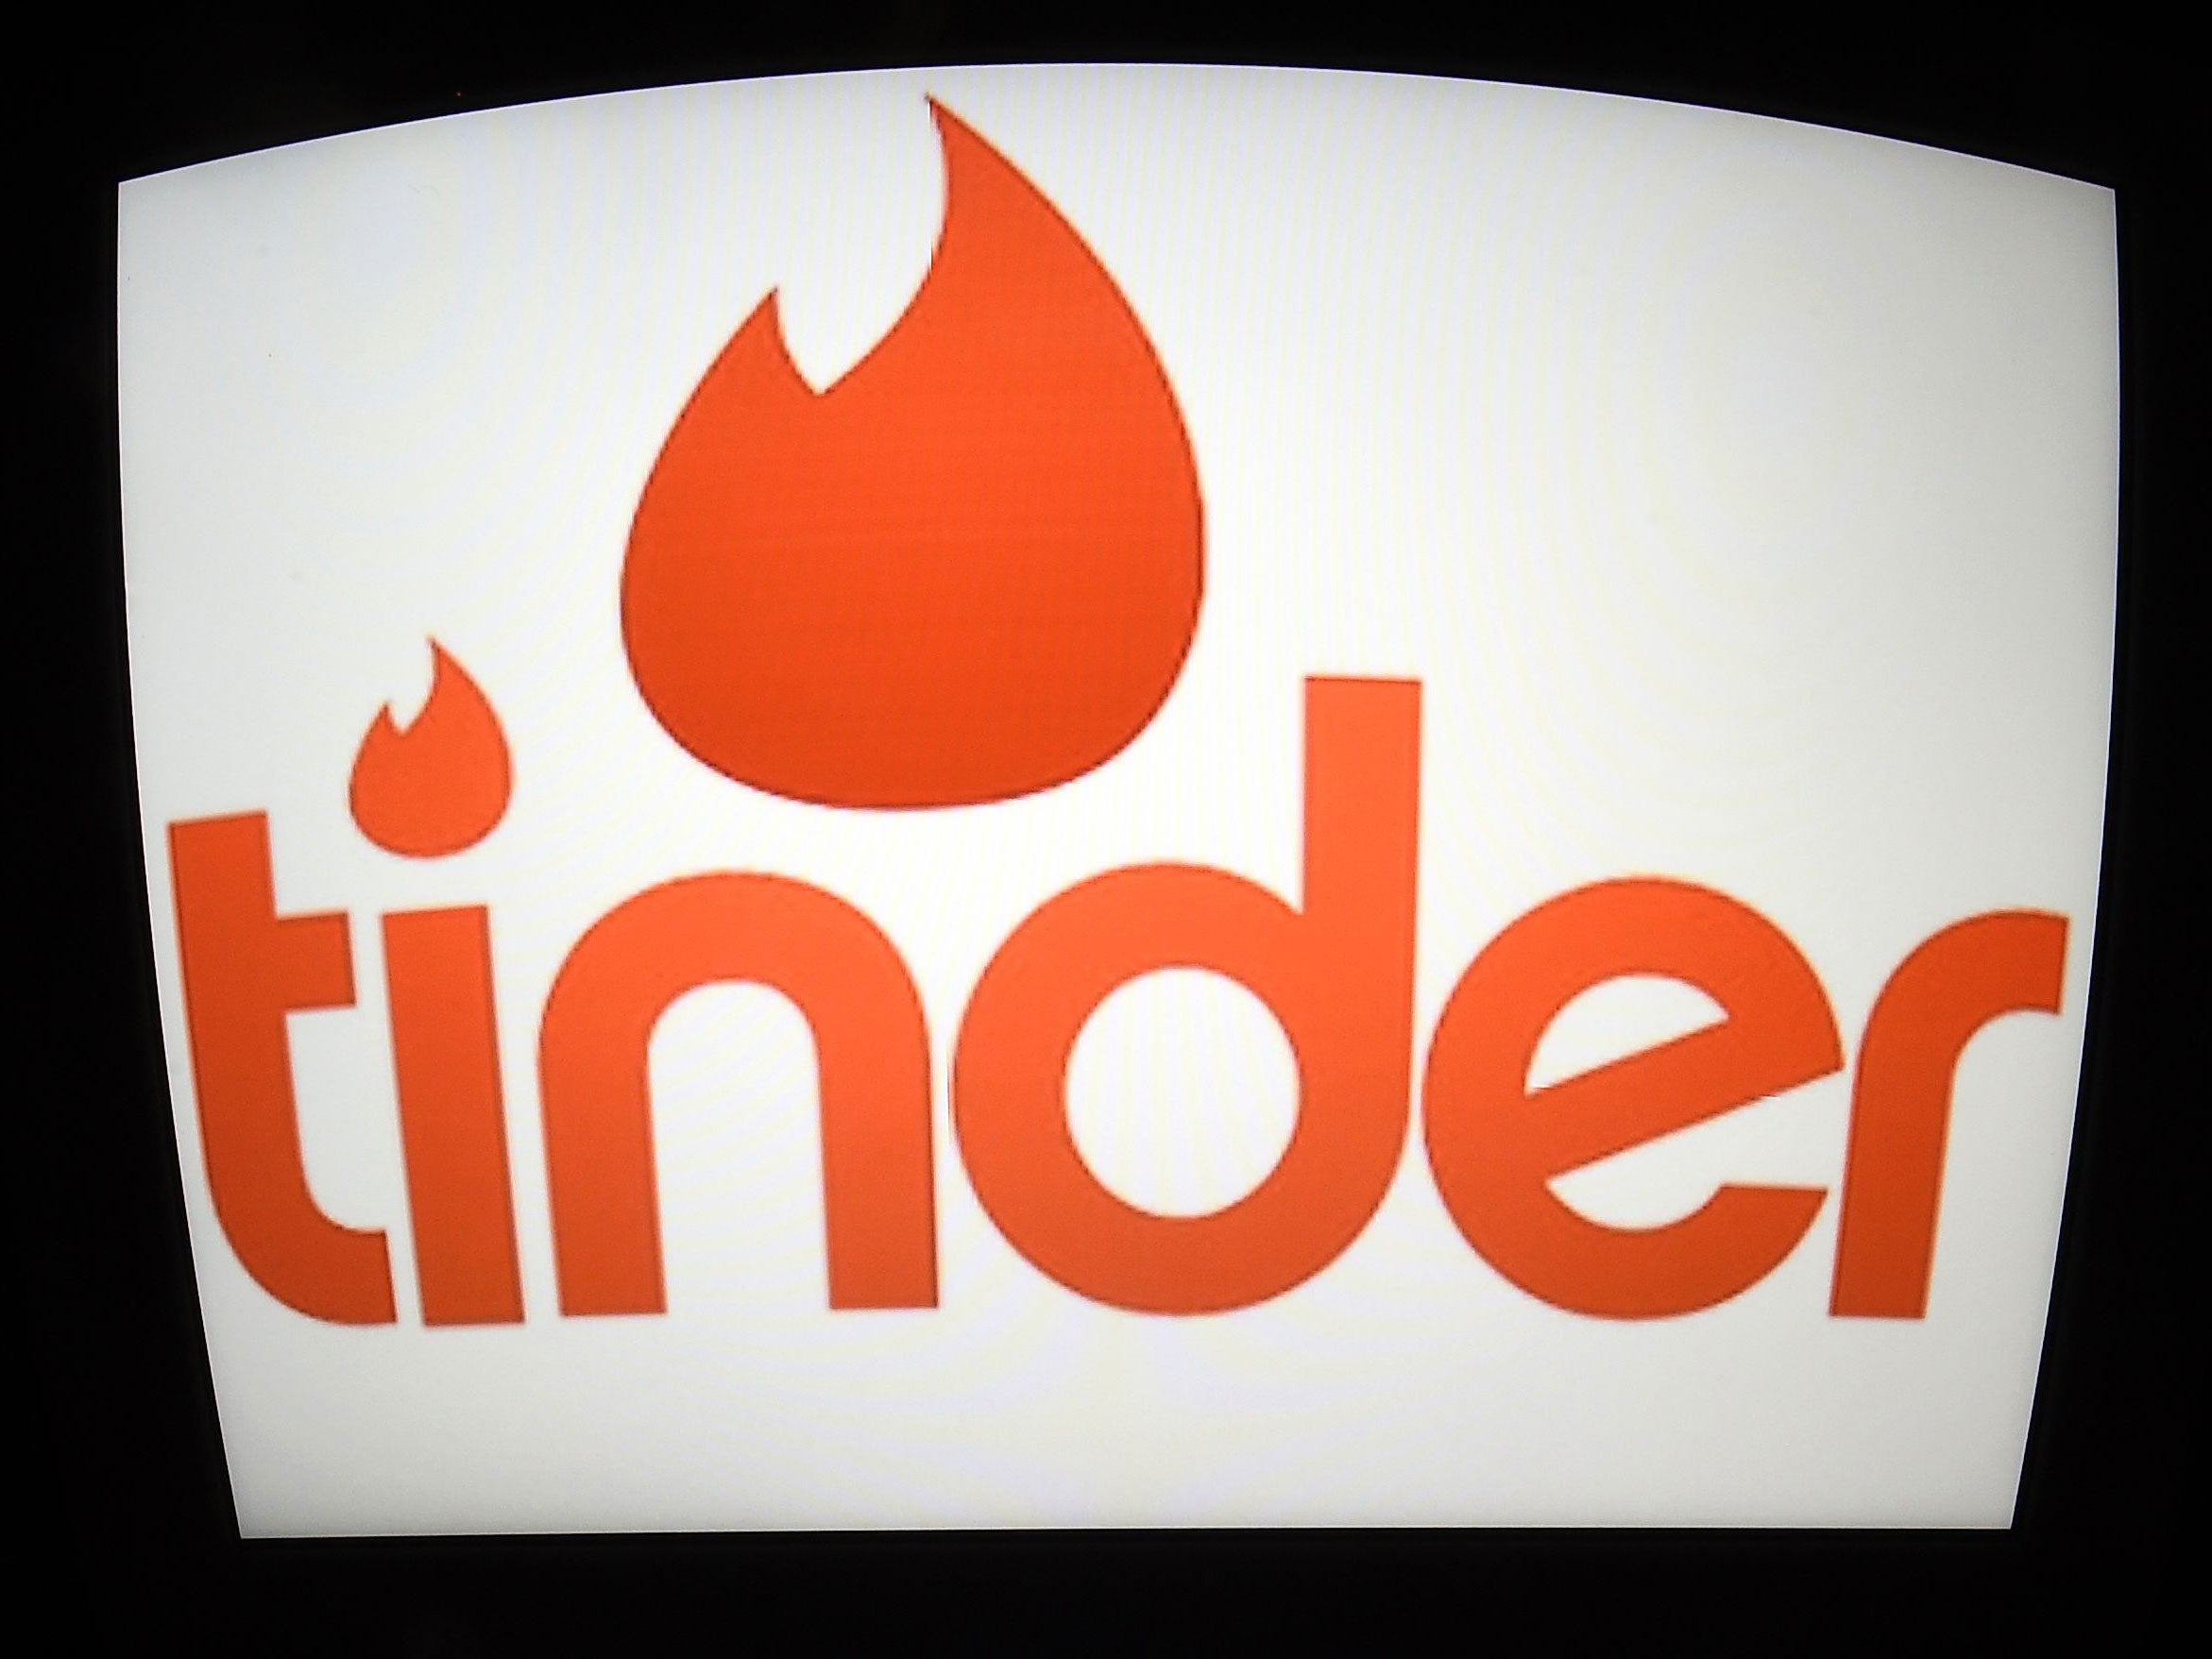 The site charges £3.50 to let you check whether someone is using Tinder